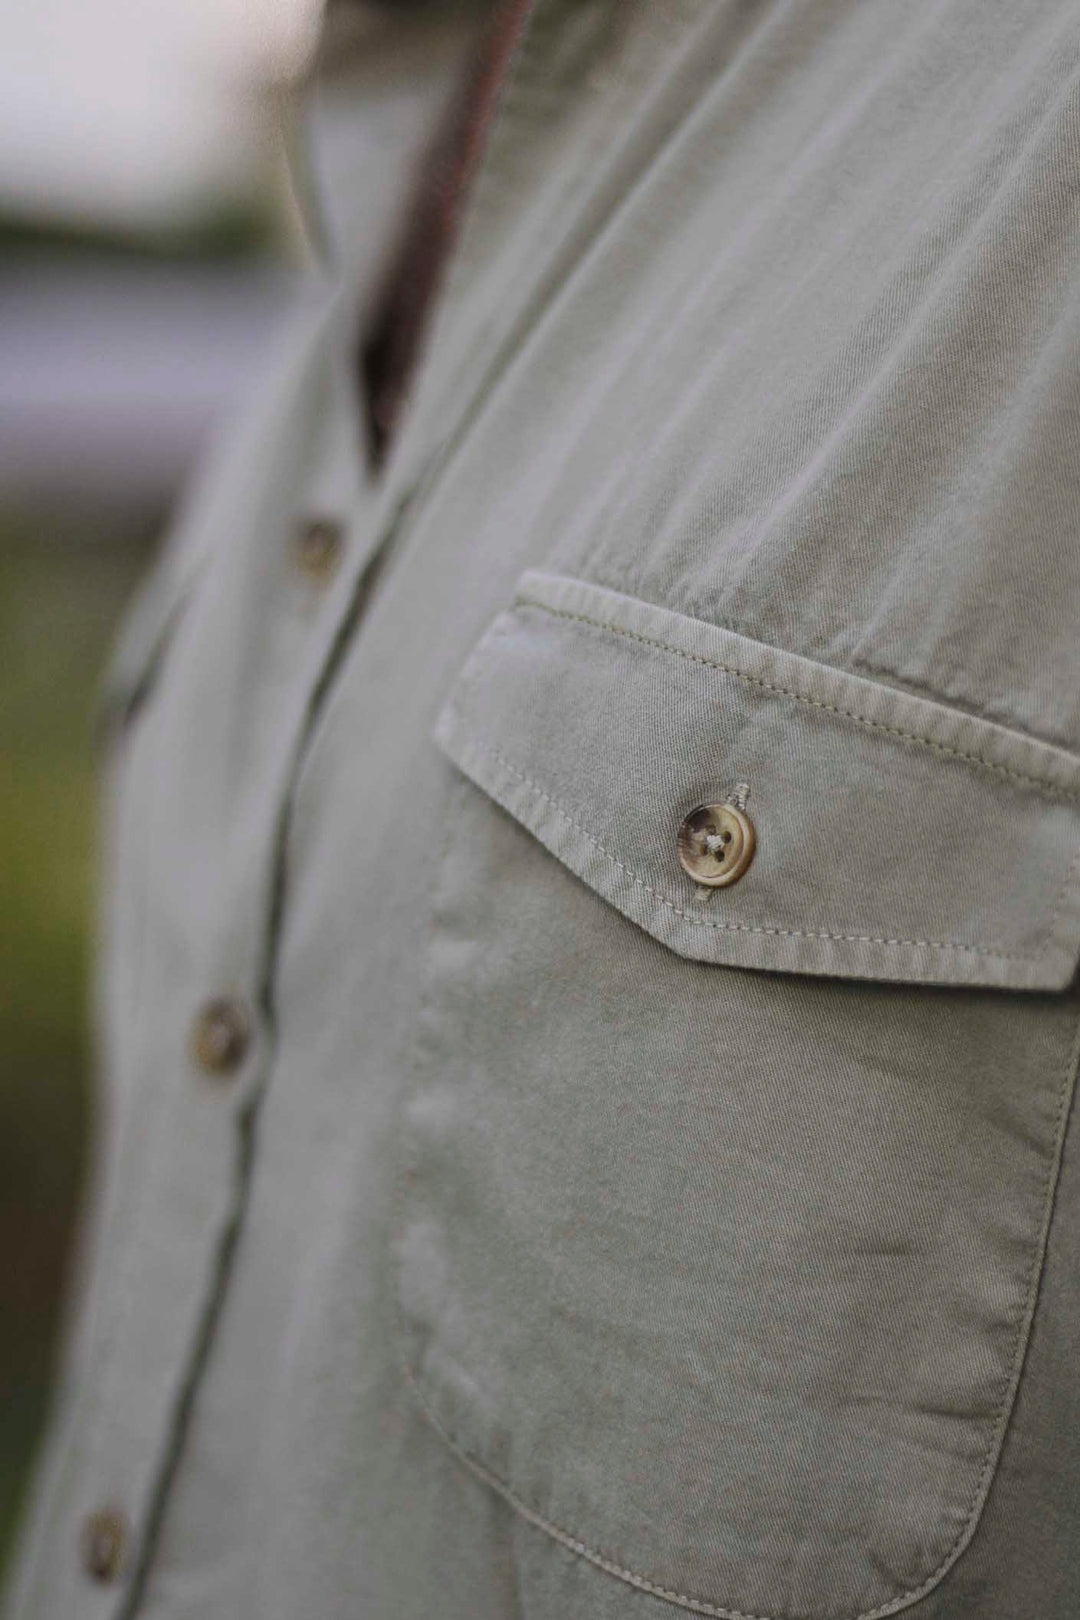 Cotton Shirt Two Pockets Chest Green Worn Hunting